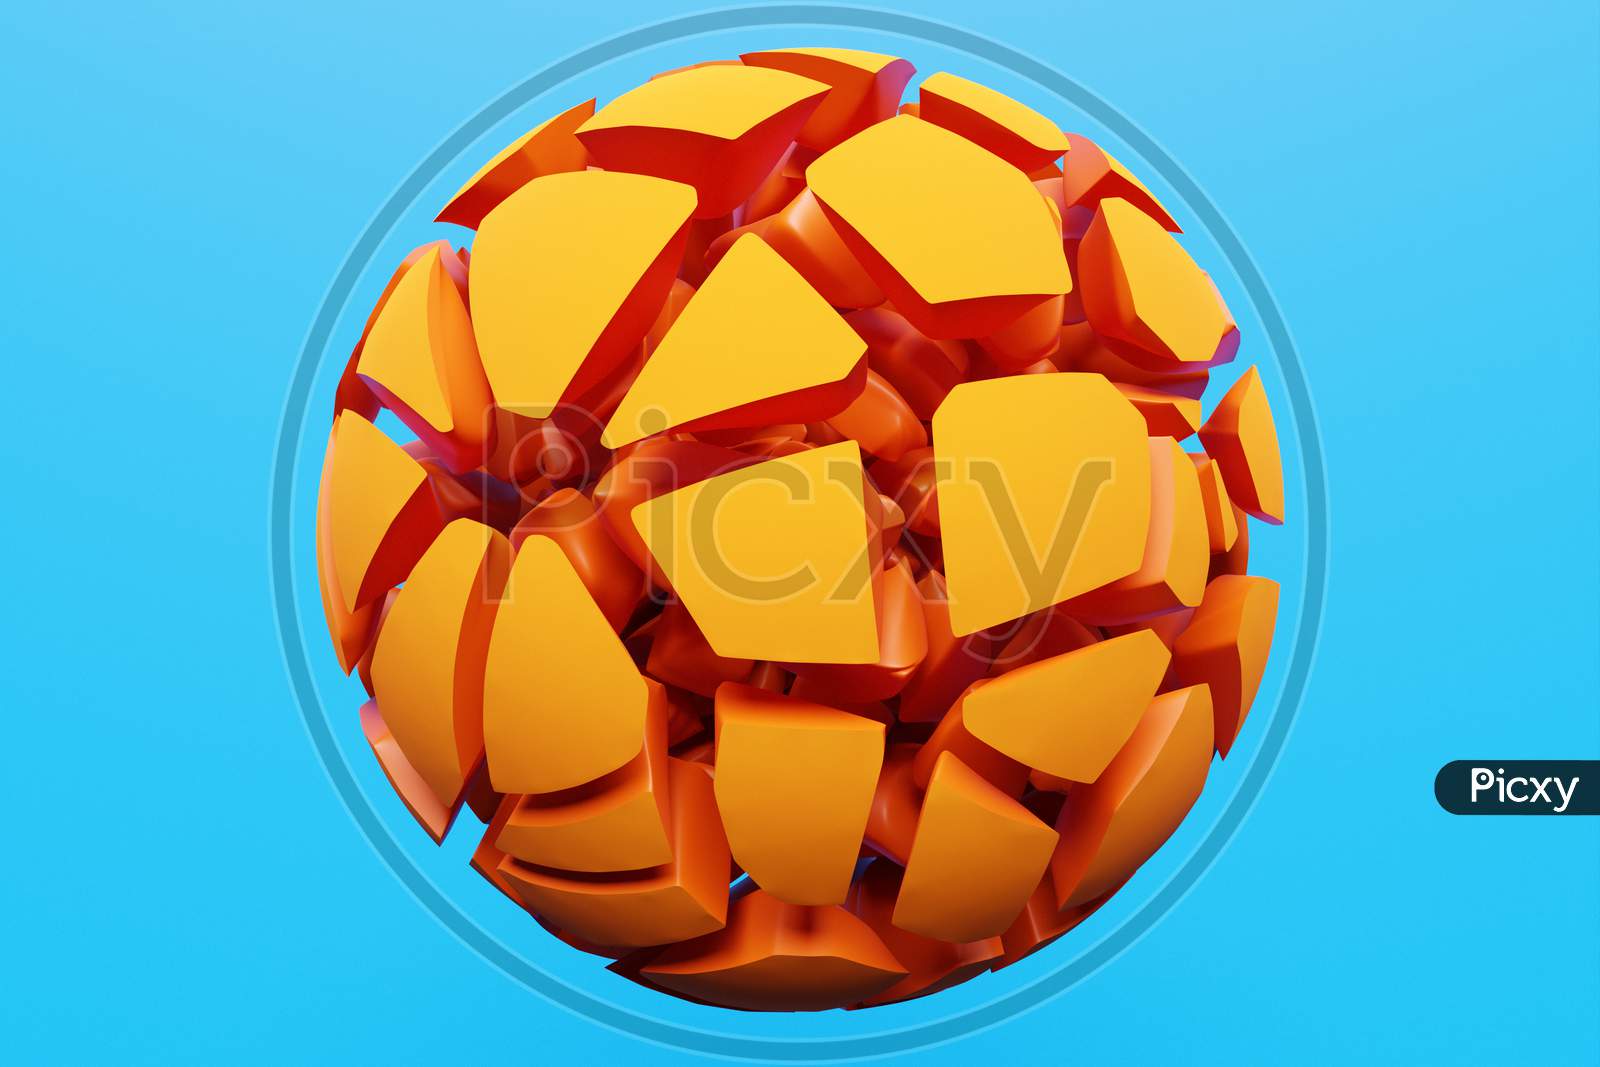 3D Rendering Of A Volumetric Shape Of A Ball. The Geometry Of Shapes That Are Broken Down Into Small Pieces. Random Shapes.